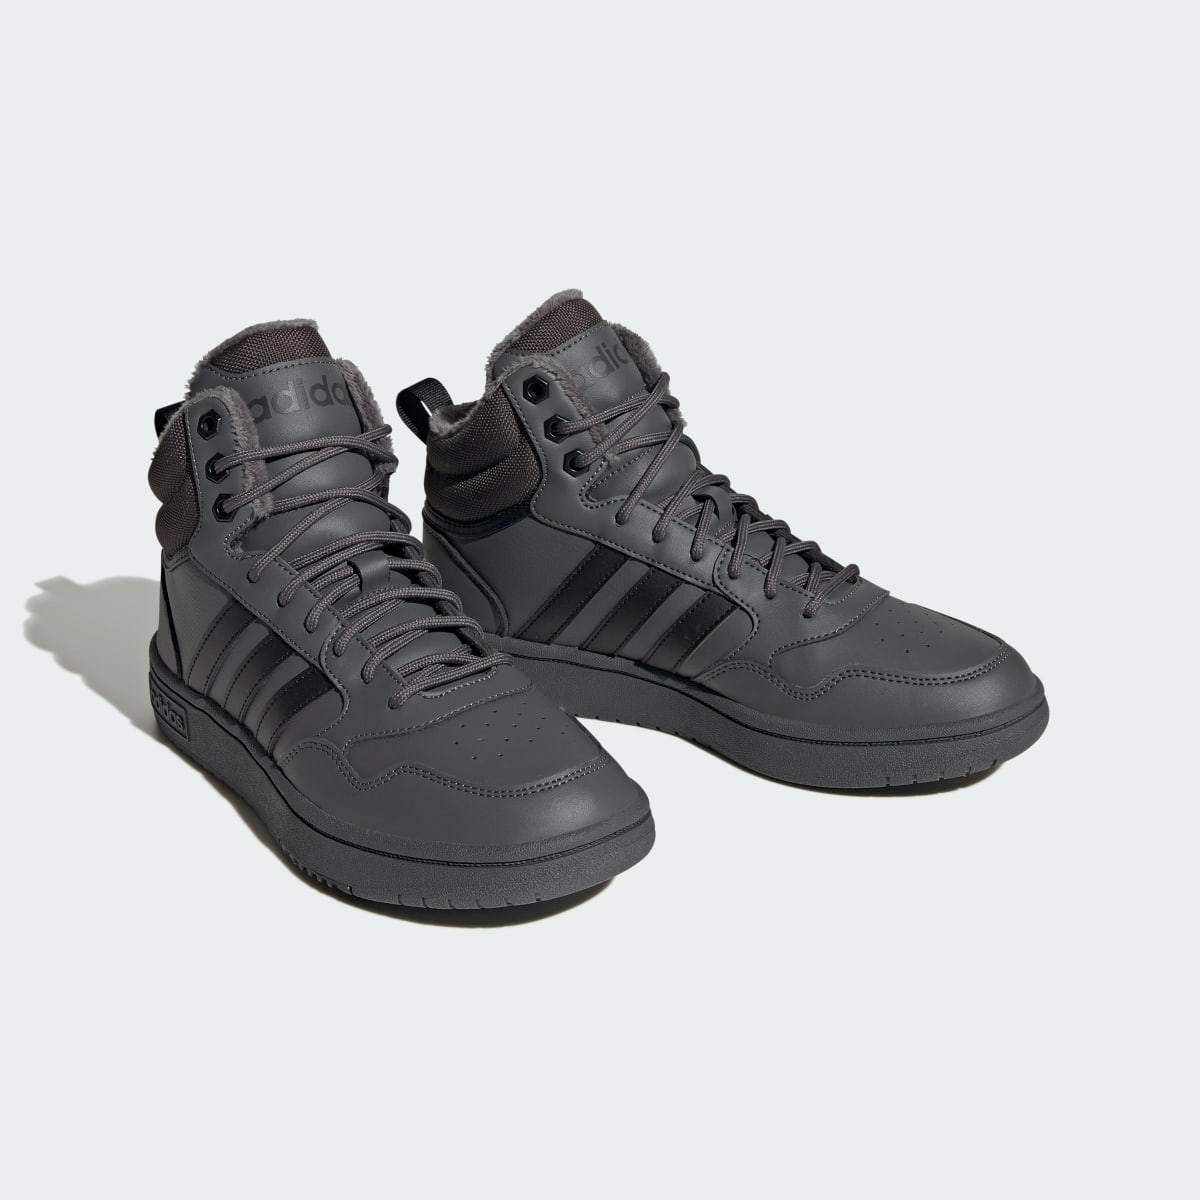 Adidas Chaussure Hoops 3.0 Mid Lifestyle Basketball Classic Fur Lining Winterized. 5